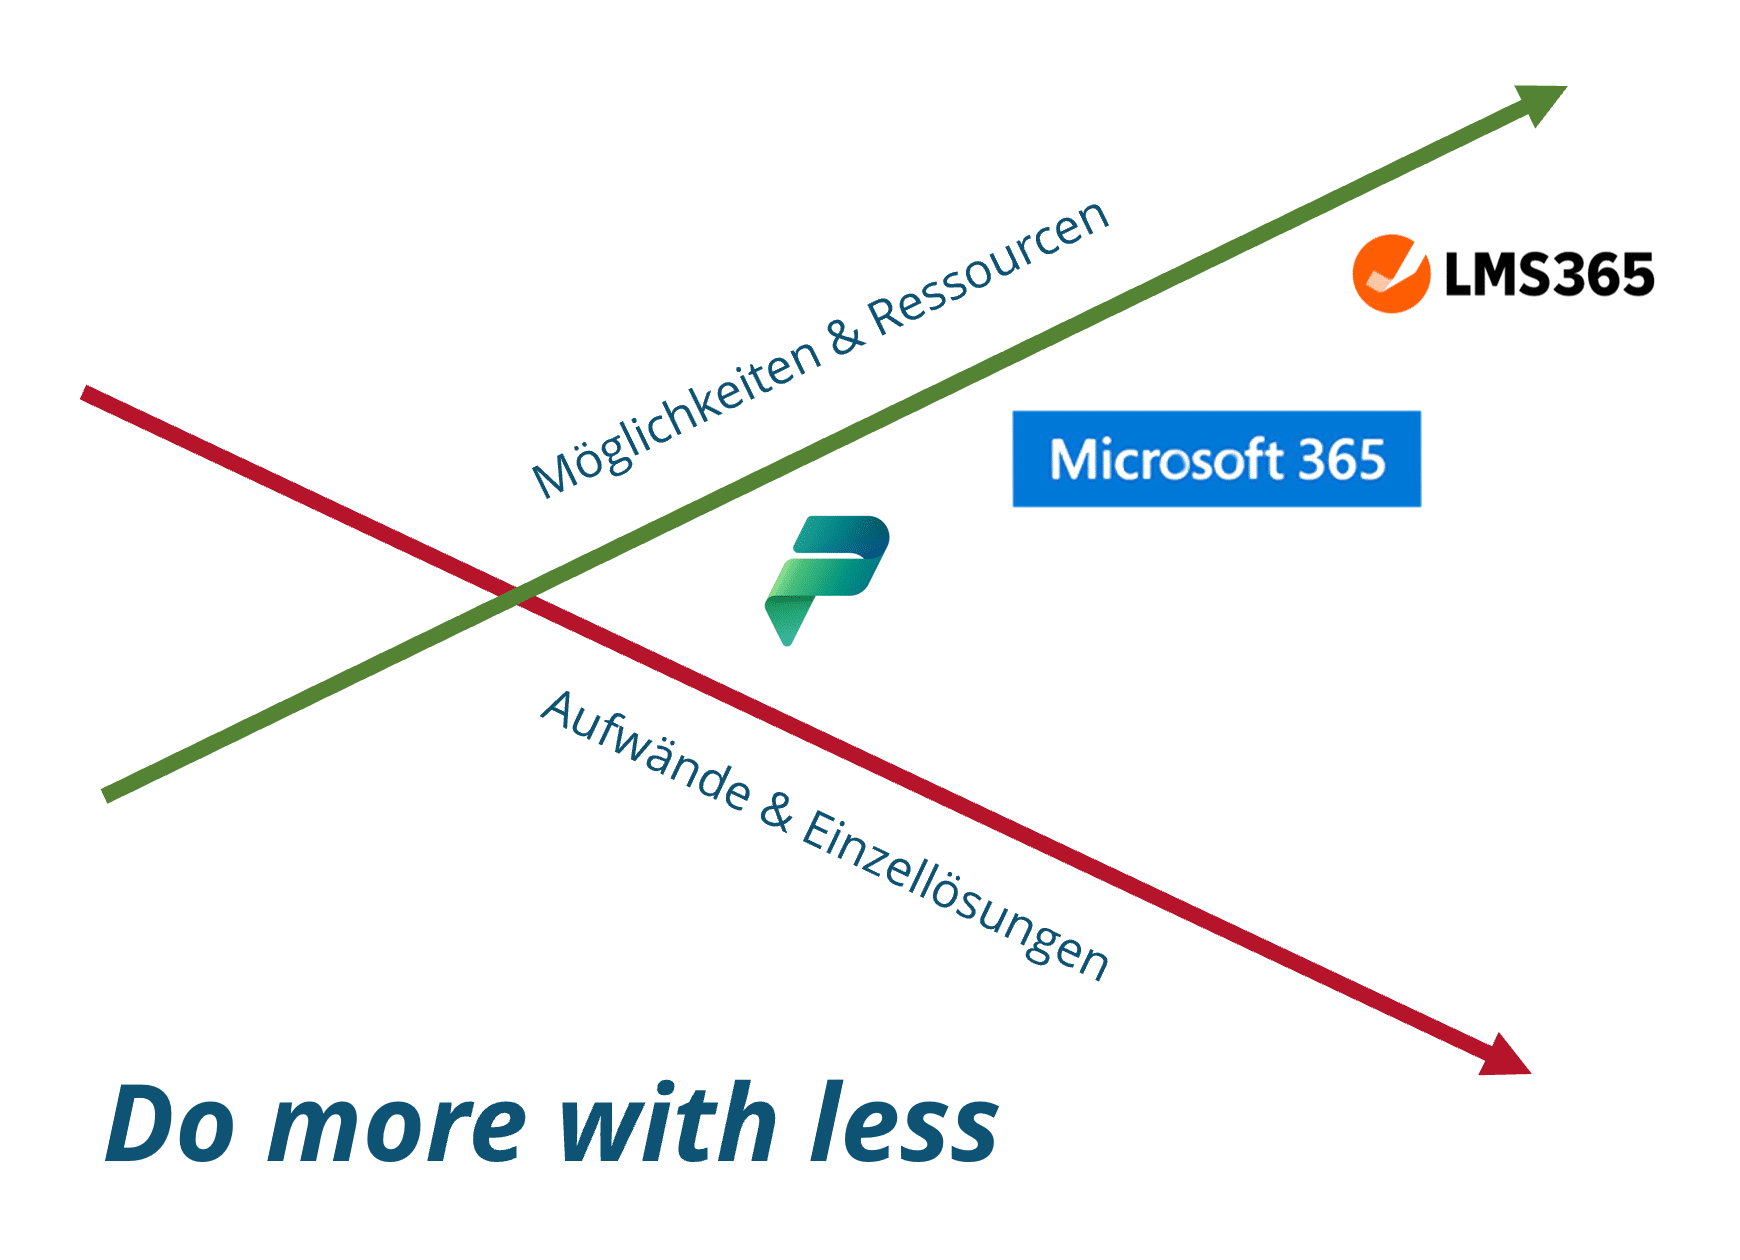 Do more with less synalis Microsoft